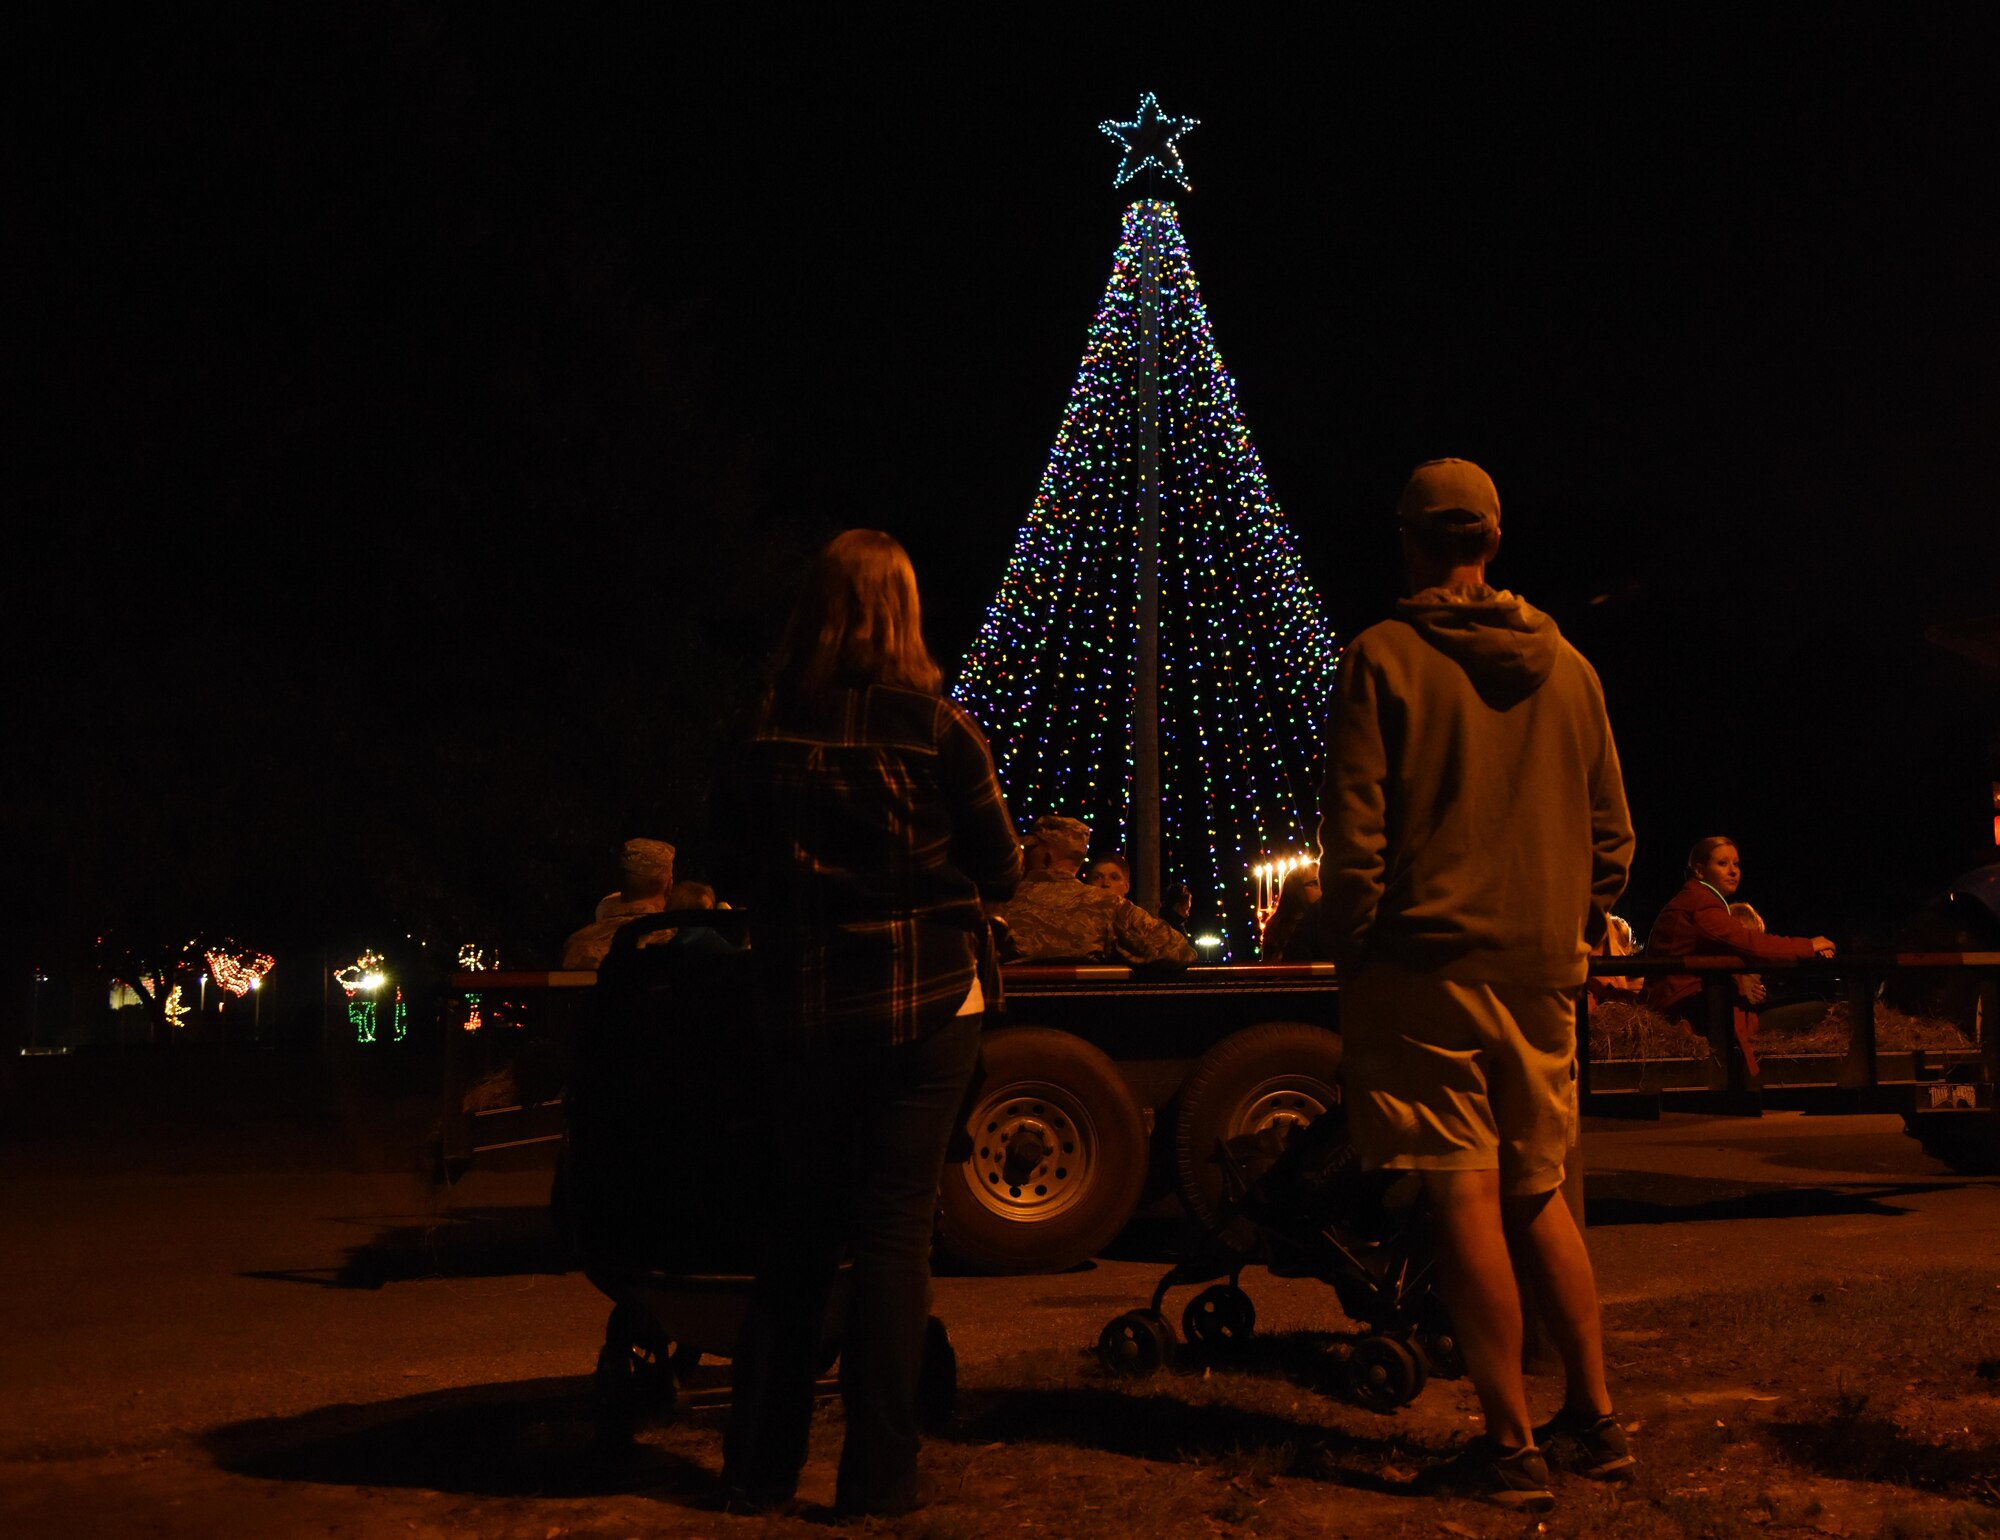 Keesler families look up at the tree light display following a tree lighting ceremony during Keesler’s annual Christmas in the Park celebration at Marina Park Dec. 1, 2016, on Keesler Air Force Base, Miss. The event, hosted by Outdoor Recreation, also included tour train rides, cookie and ornament decorating, and visits with Santa. (U.S. Air Force photo by Kemberly Groue)